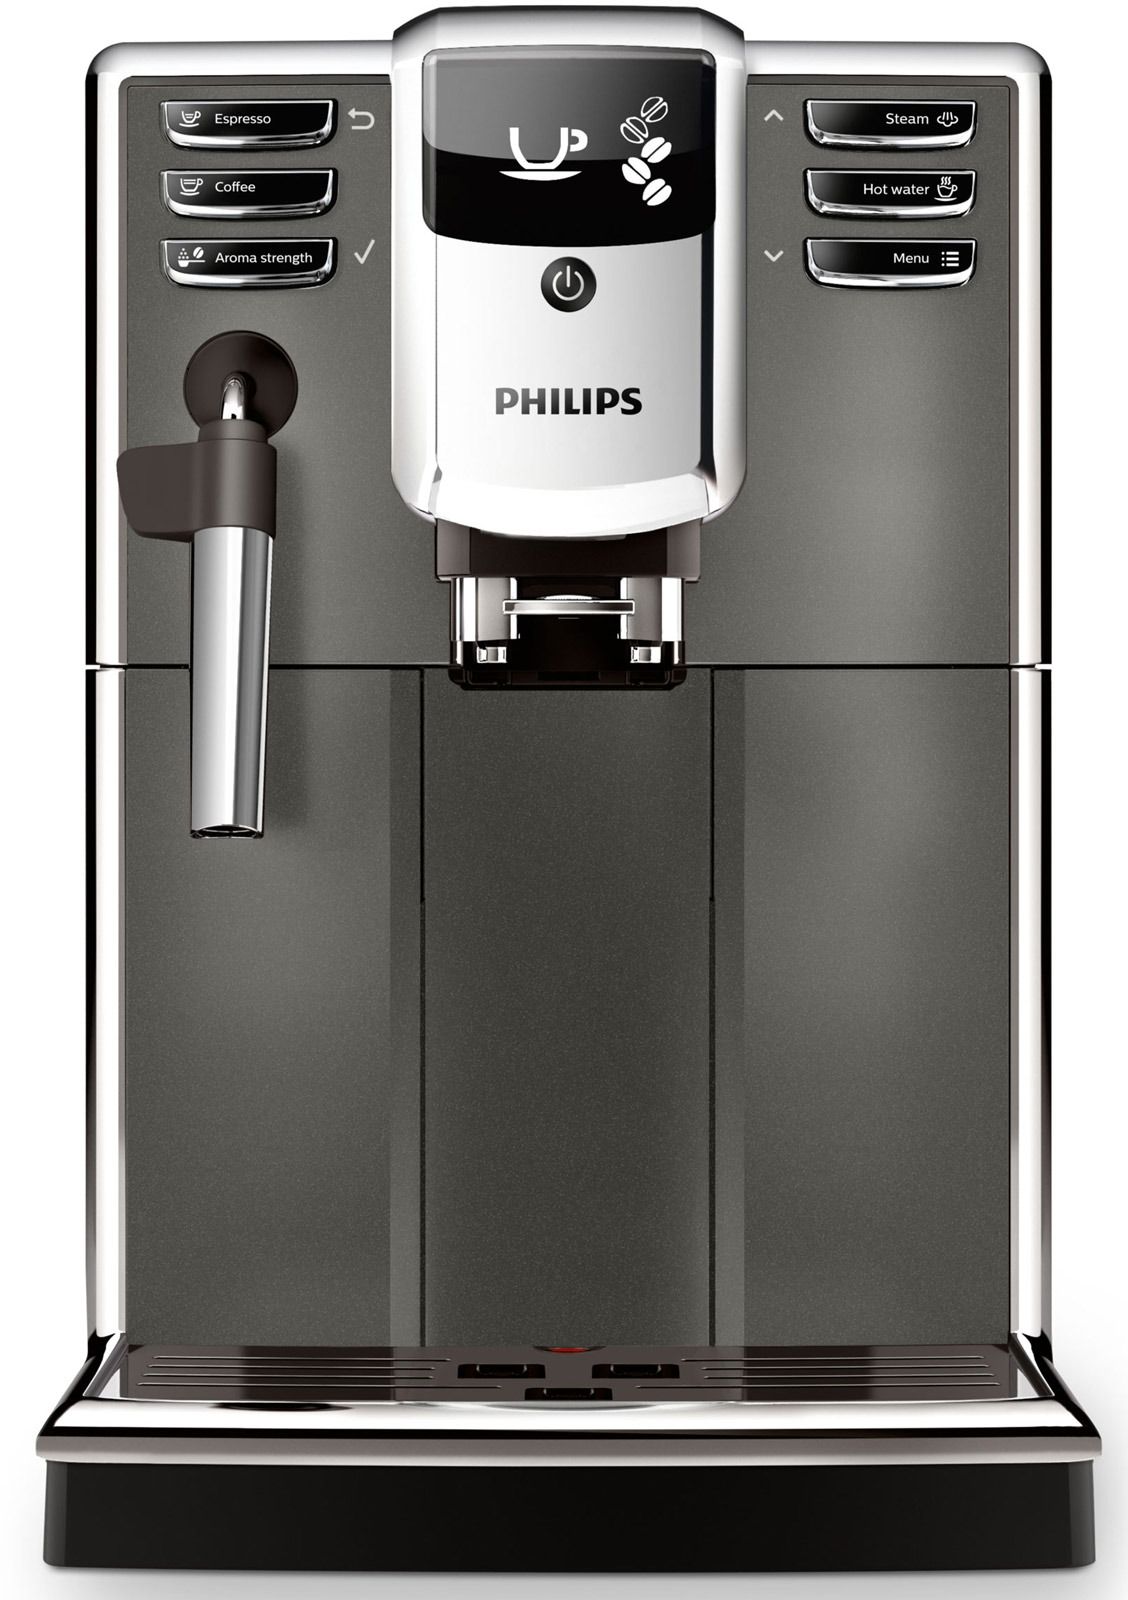  Philips Series 5000 EP5314/10, Silver Black